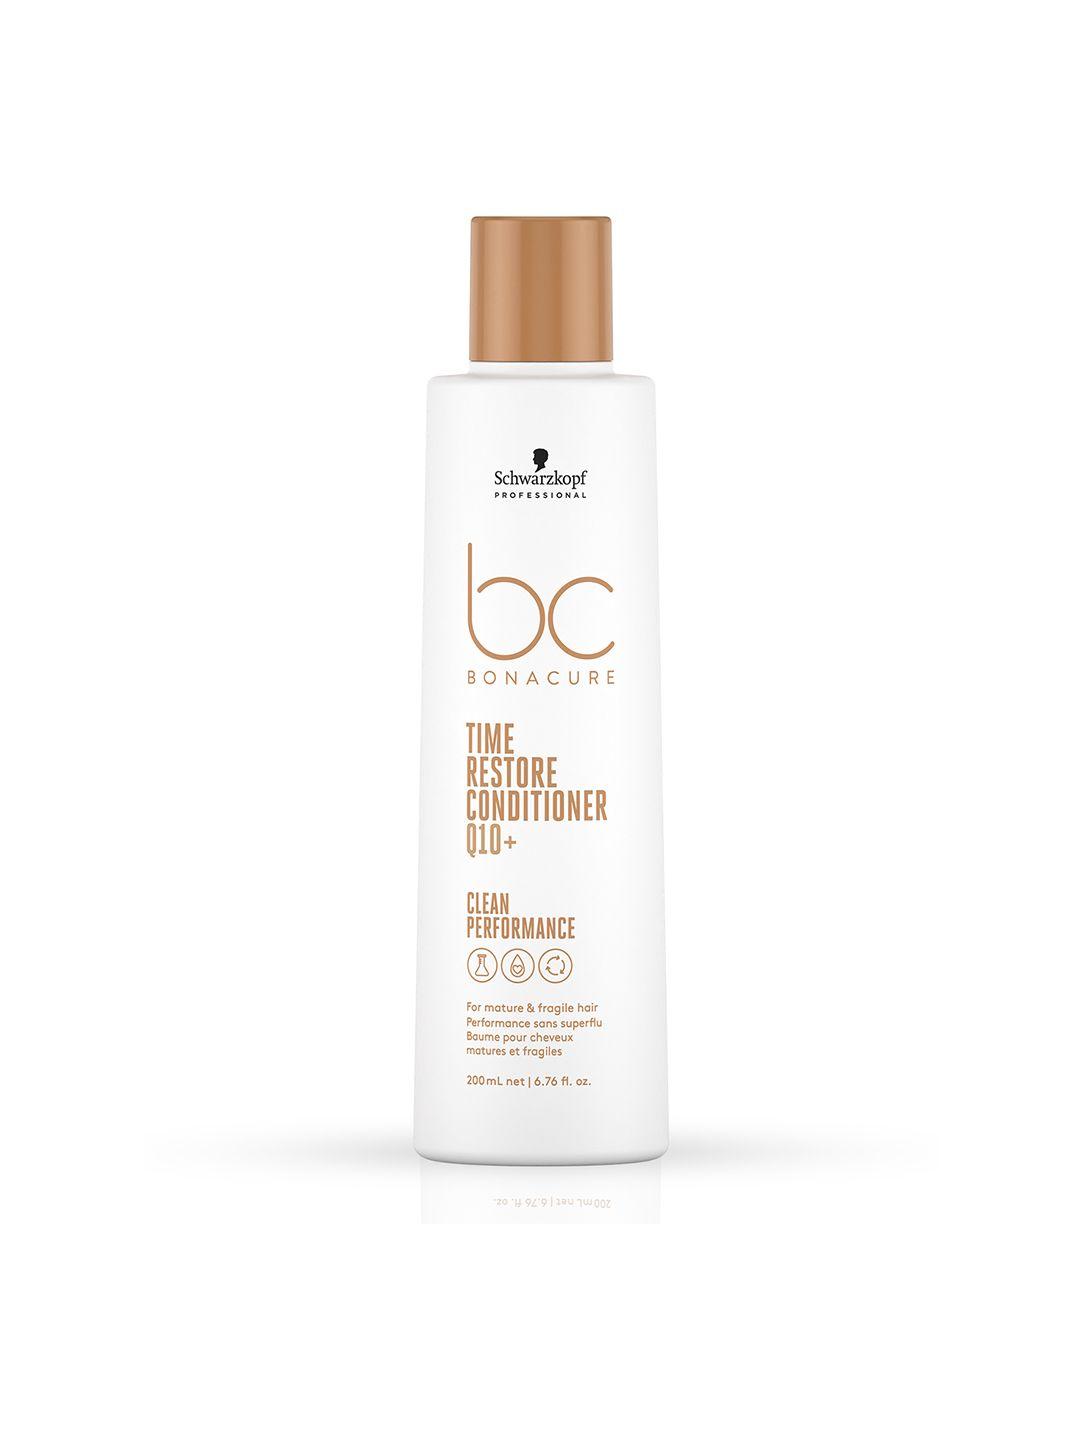 schwarzkopf professional bonacure time restore conditioner with q10+ for mature hair-200ml